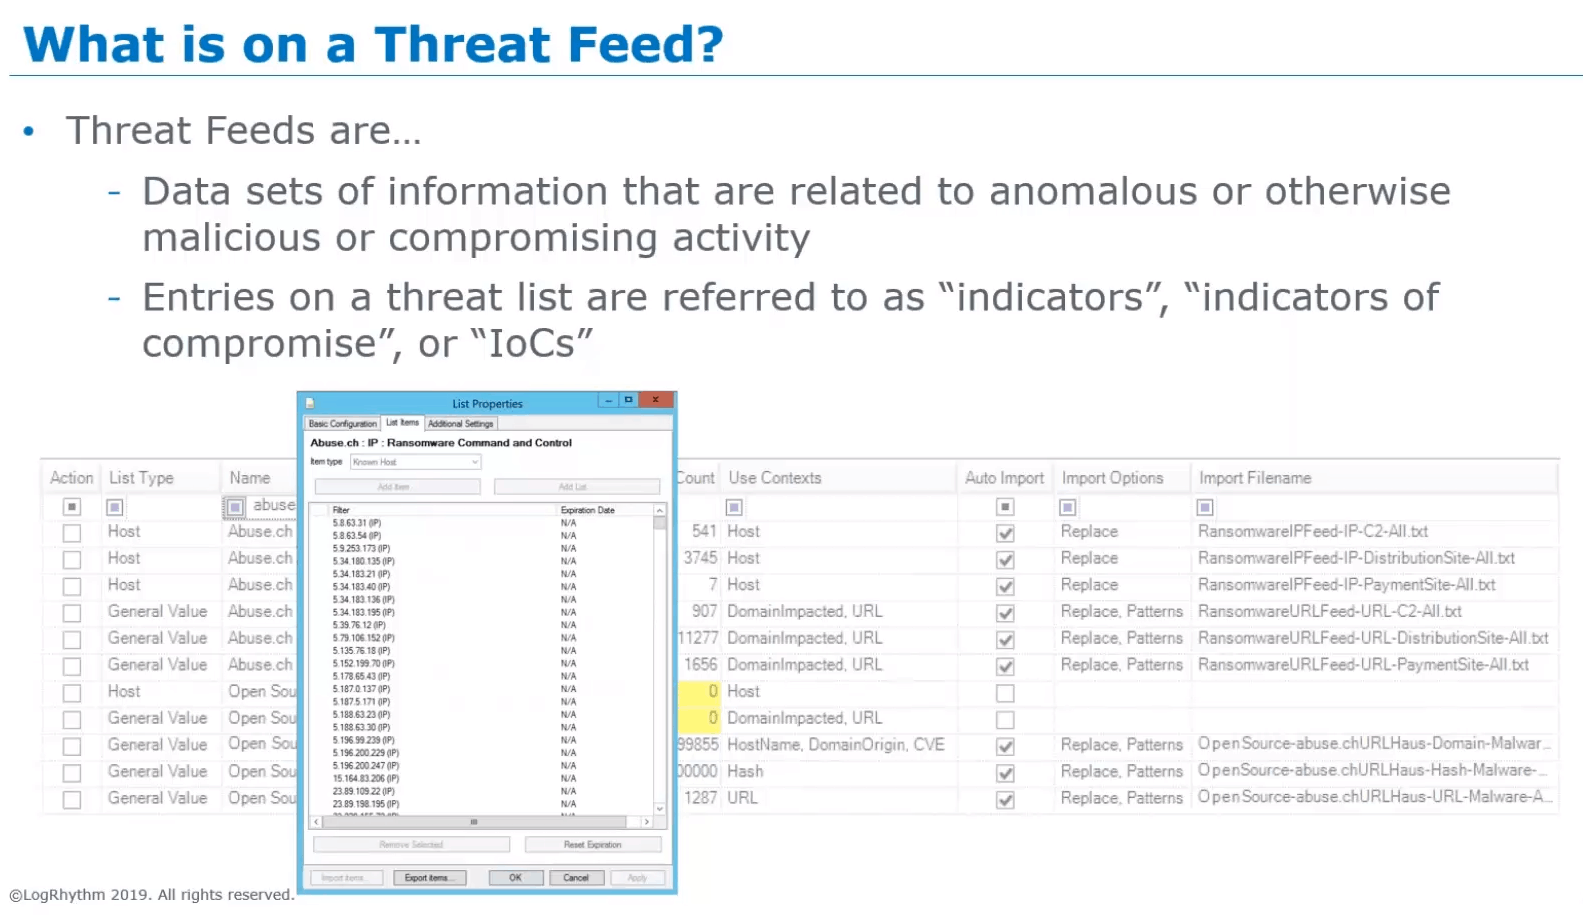 What is on a threat feed slide